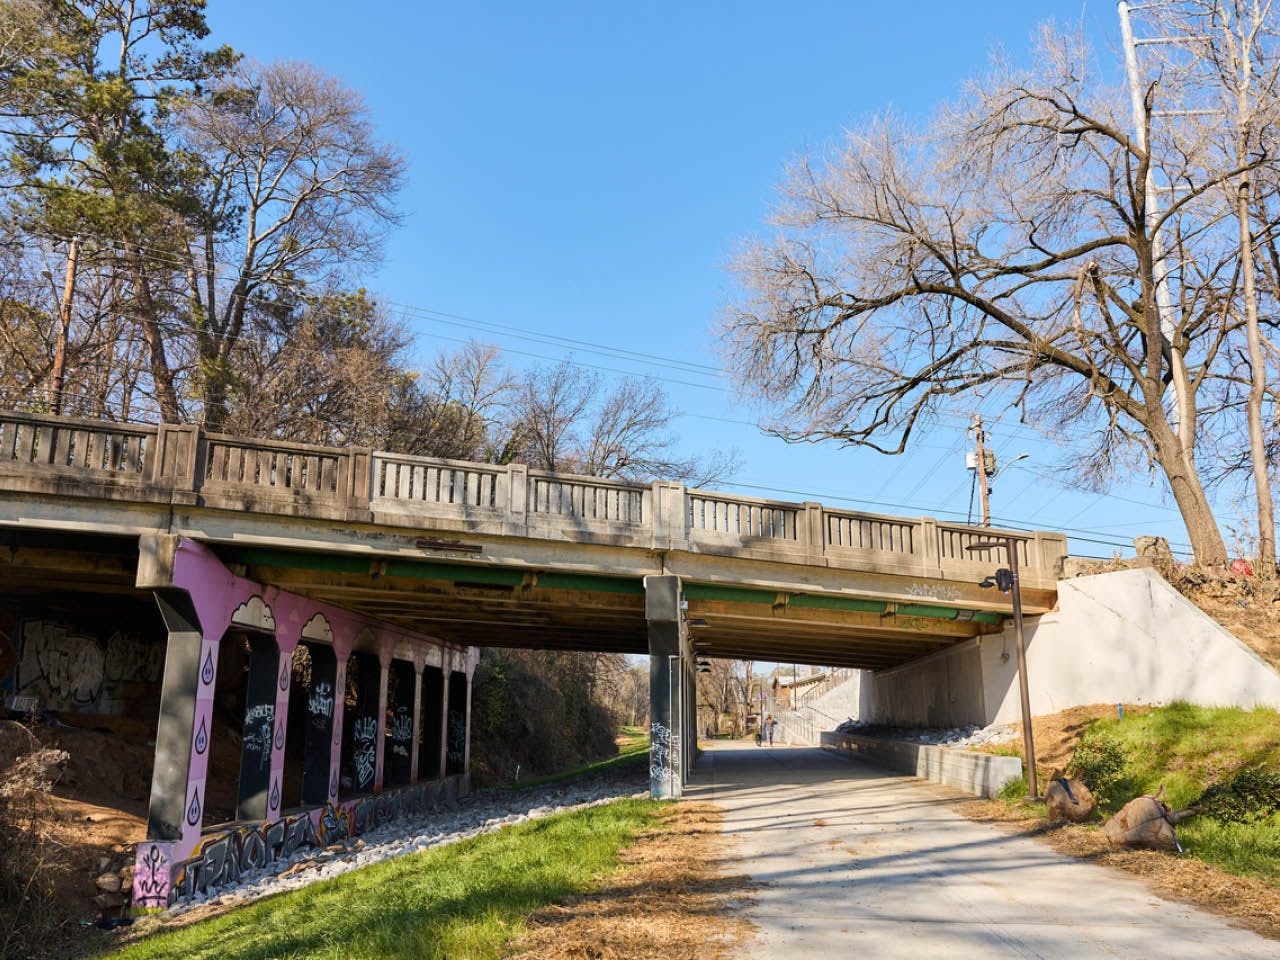 The Northeast Trail passes under Piedmont Avenue between Piedmont Park and Ansley Mall. (Photo Credit: Erin Sintos)